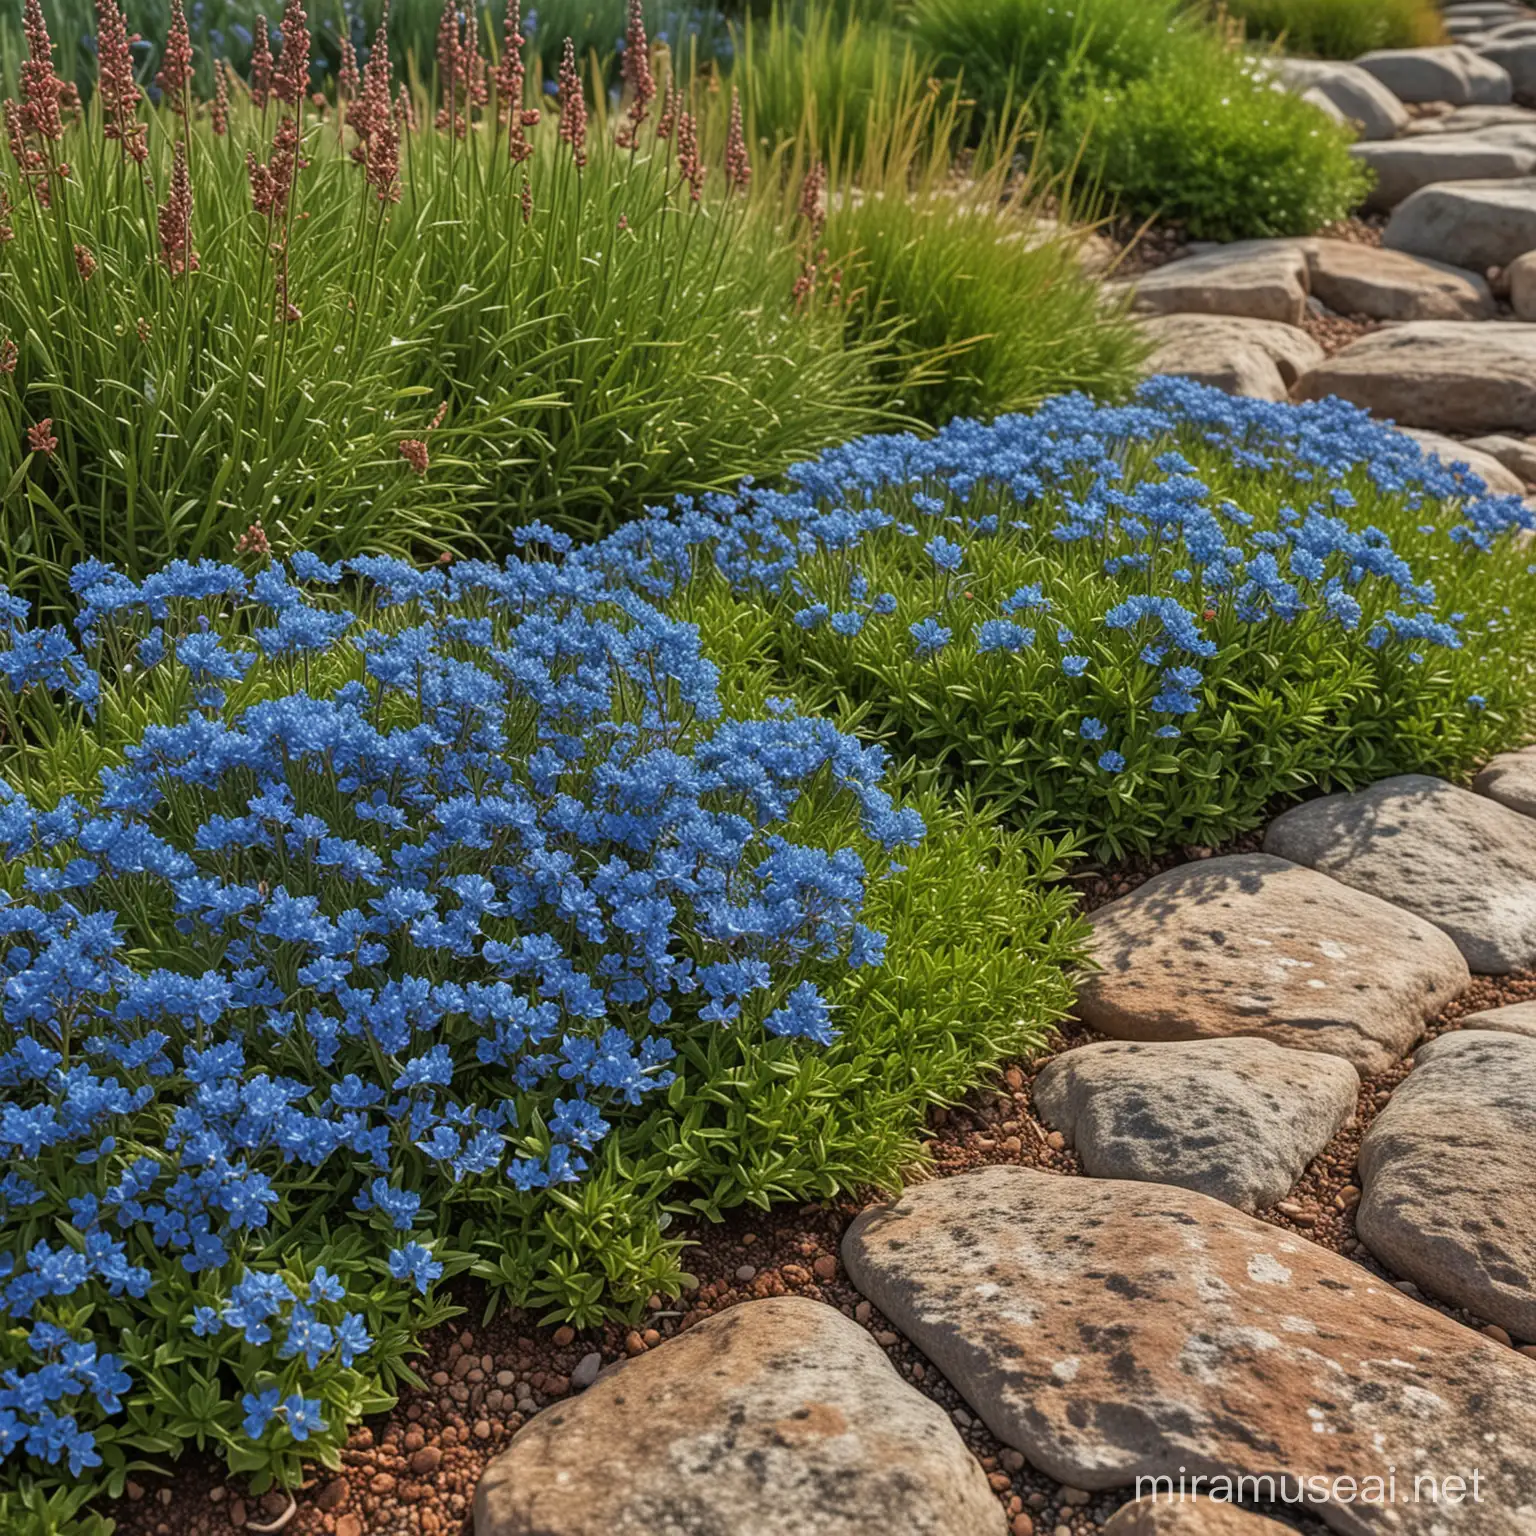 LITHODORA Heavenly Blue and Sedum Acre Rock Garden with Centranthus Ruber in HDR 8K